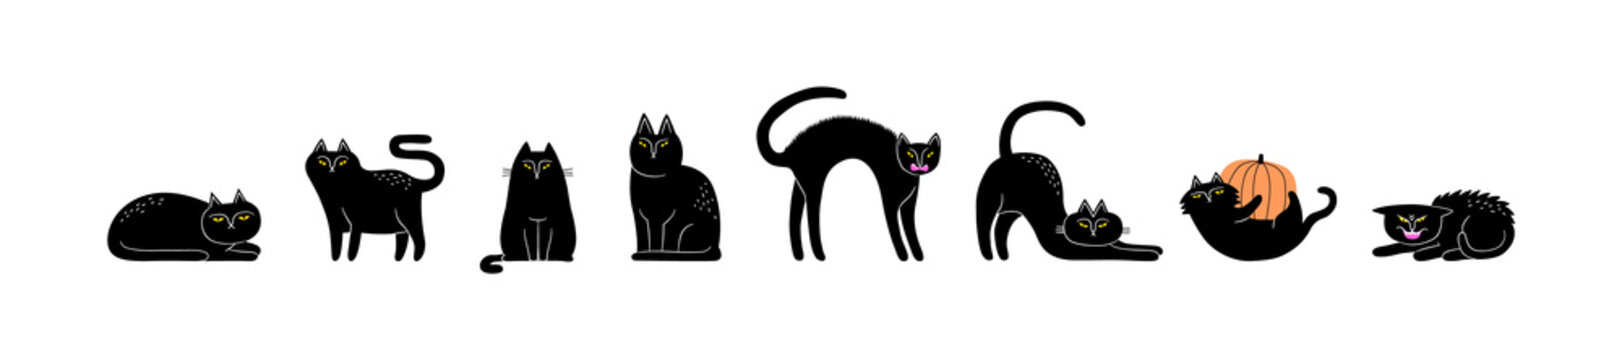 Set of halloween black cat animal cartoon illustration. Funny hand drawn witch cats collection on isolated background.